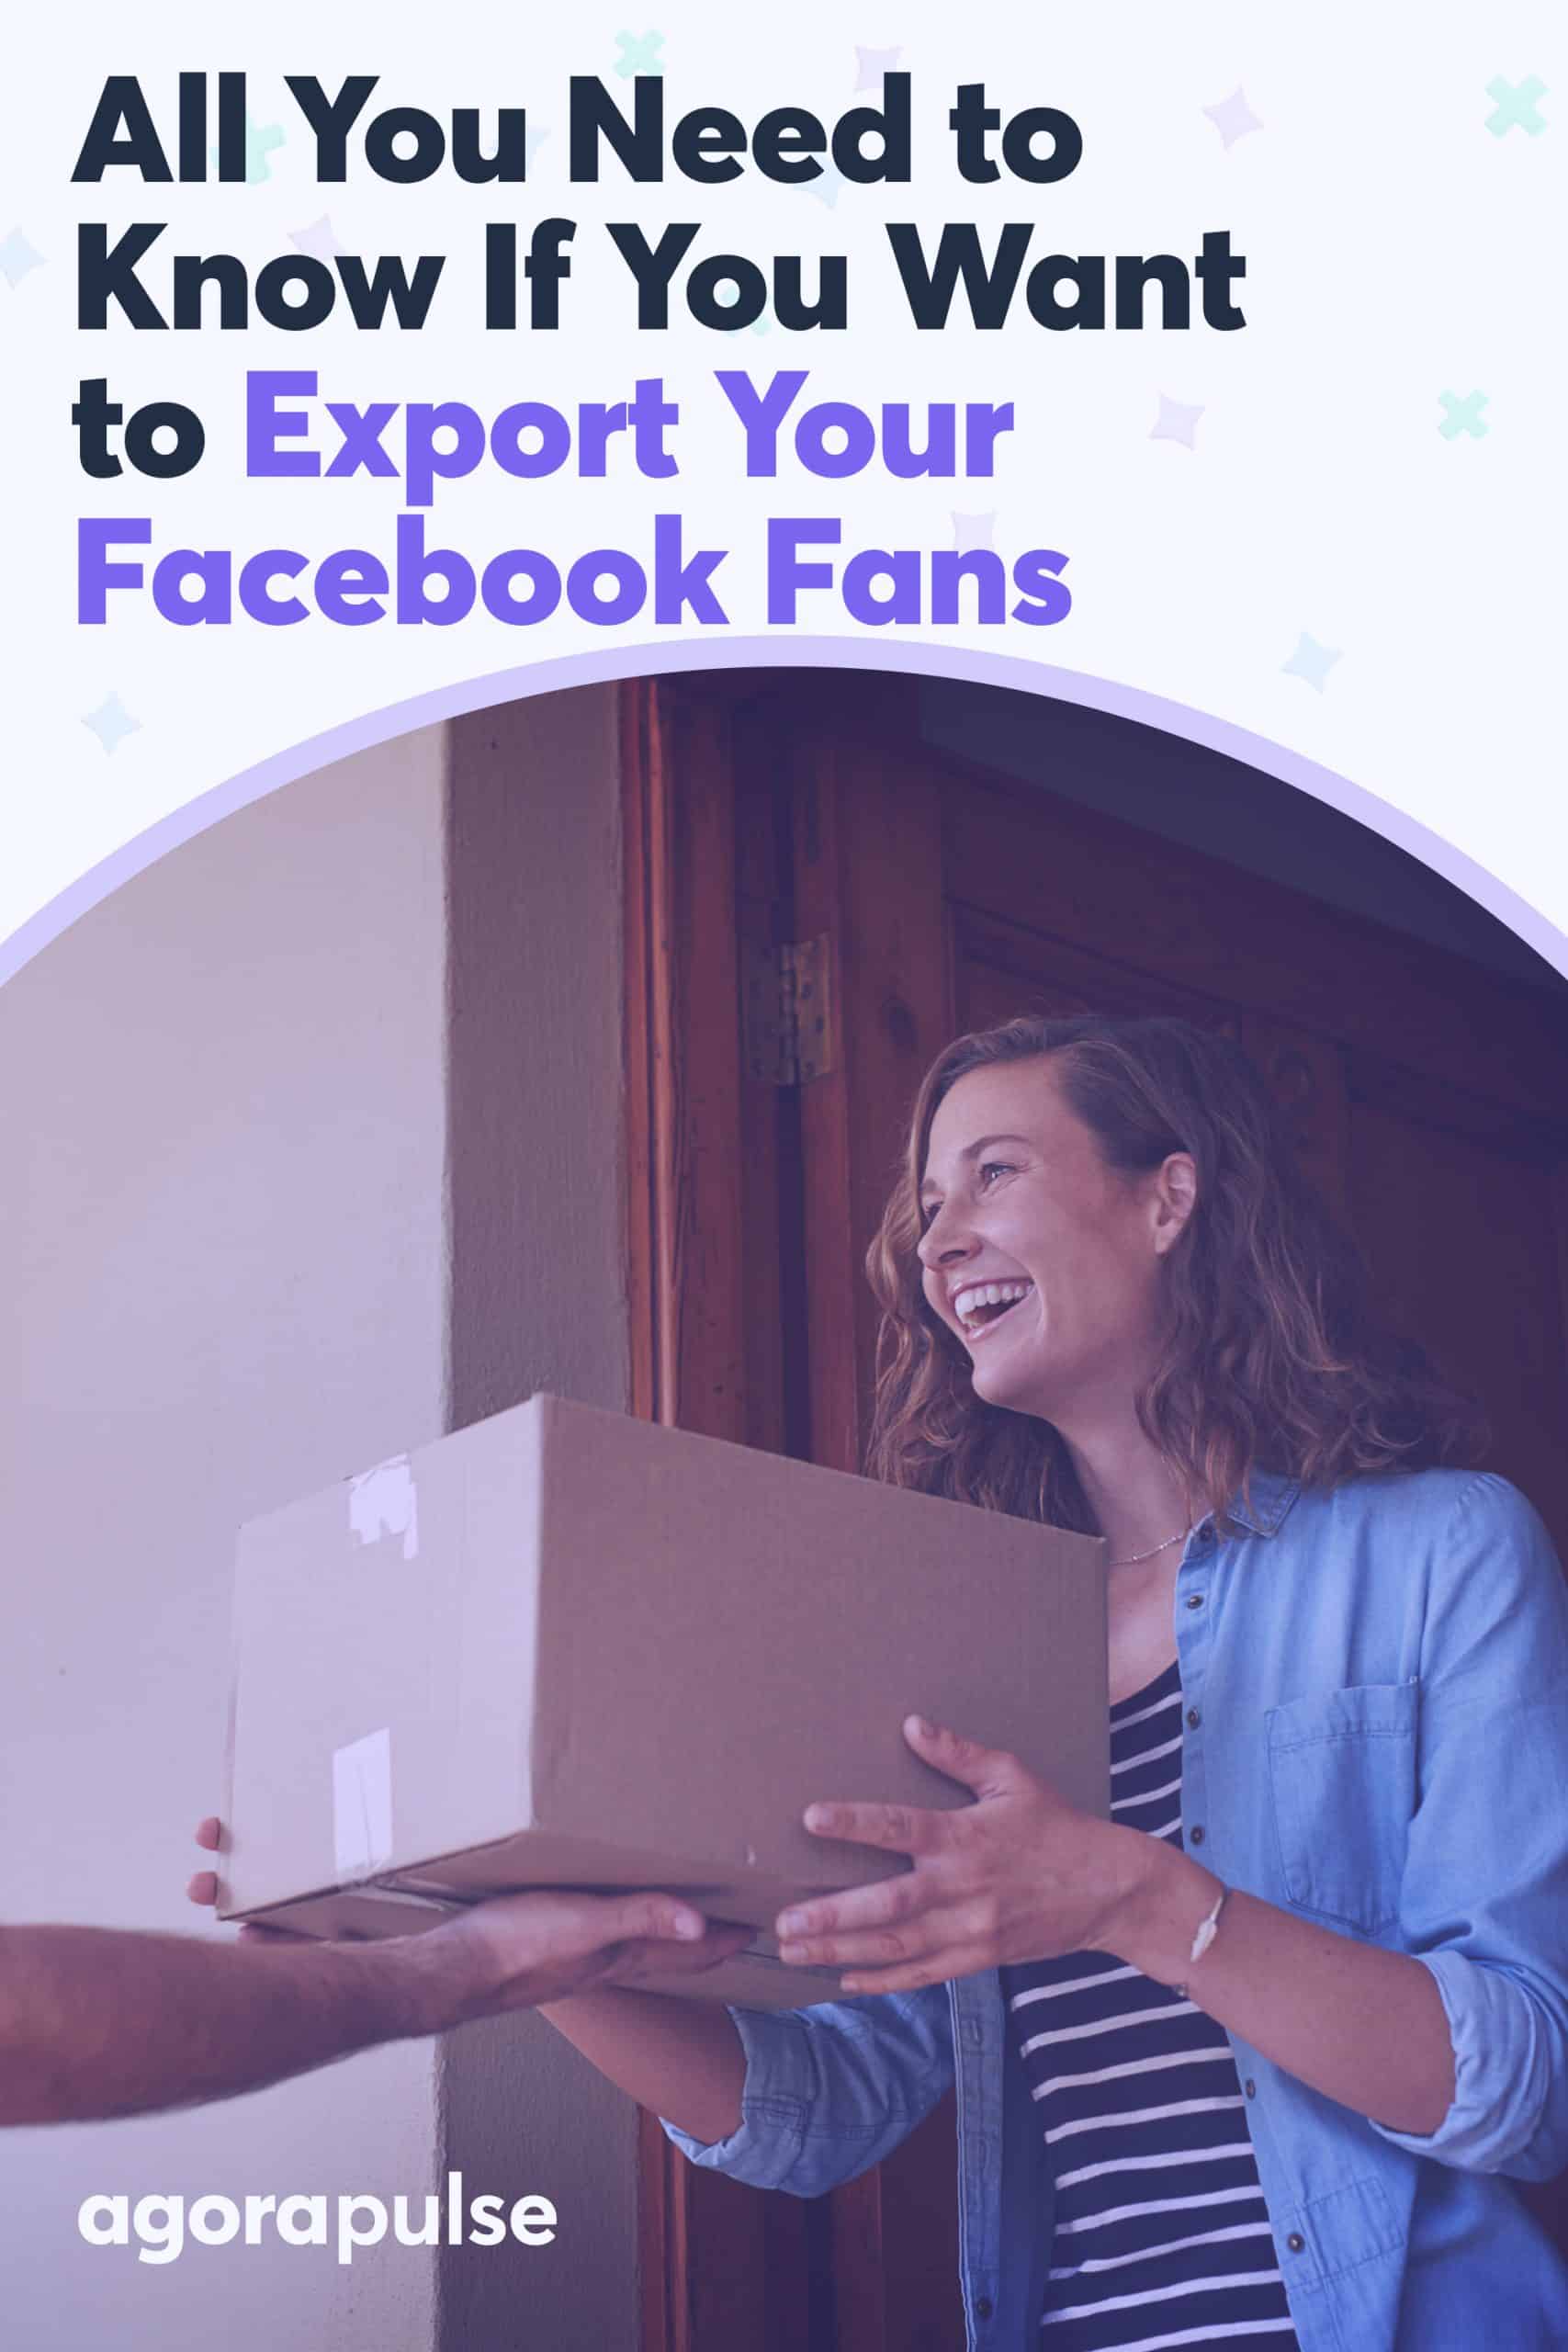 All You Need to Know If You Want to Export Your Facebook Fans